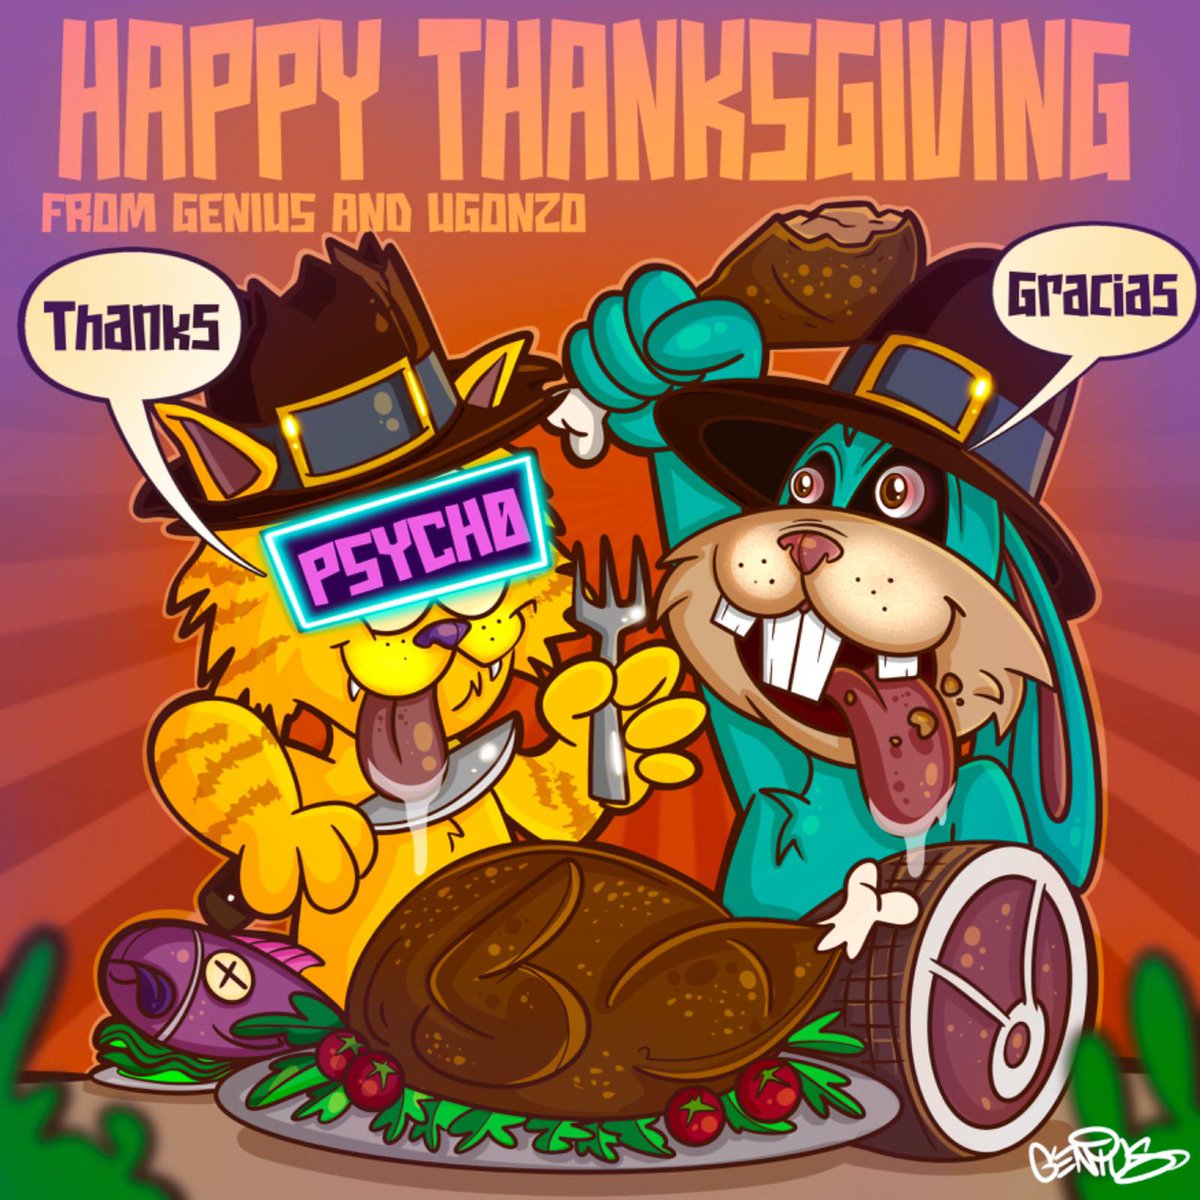 🦃Happy Thanksgiving 🦃 From @ElRealGenius , @Ugonzo_art & the rest of the MH/PK team! We hope you have a great day amongst family & friends 🫶 Share below what you are thankful for! 💕